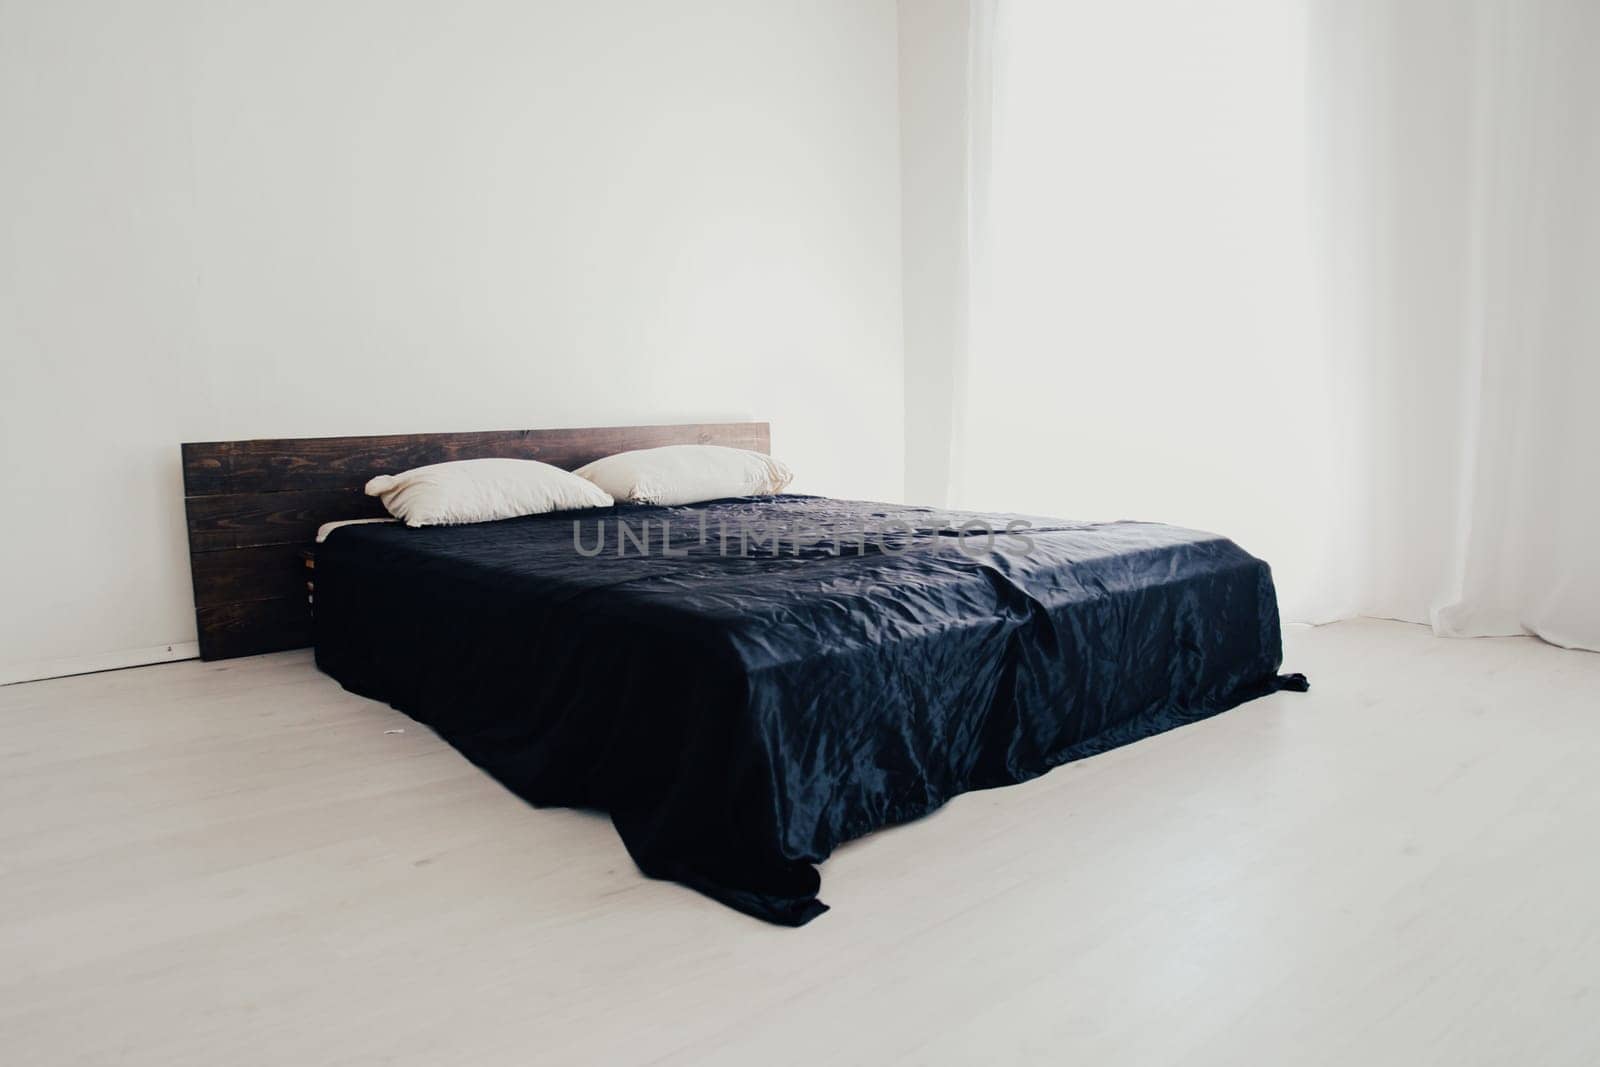 Interior white bedroom and bed with black sheets by Simakov